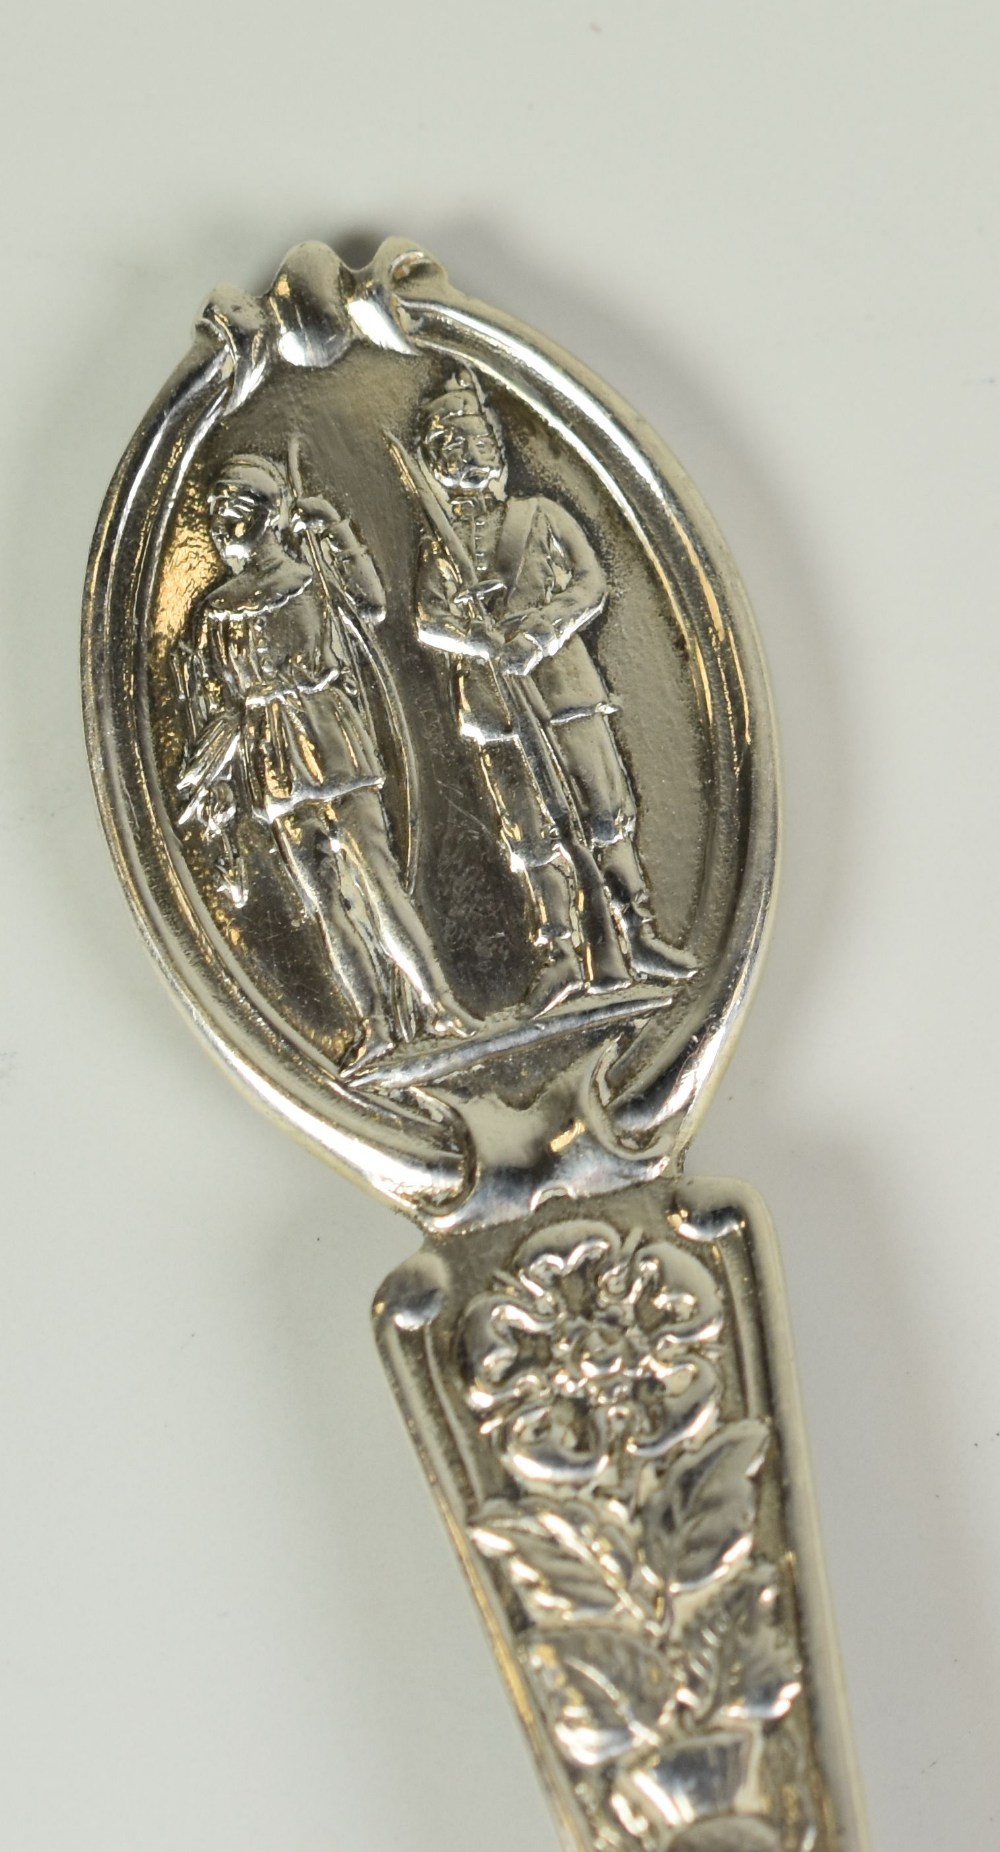 MATCHED SET OF FOUR SILVER TEA SPOONS, having National Rifle Association Emblem and individually - Image 2 of 2